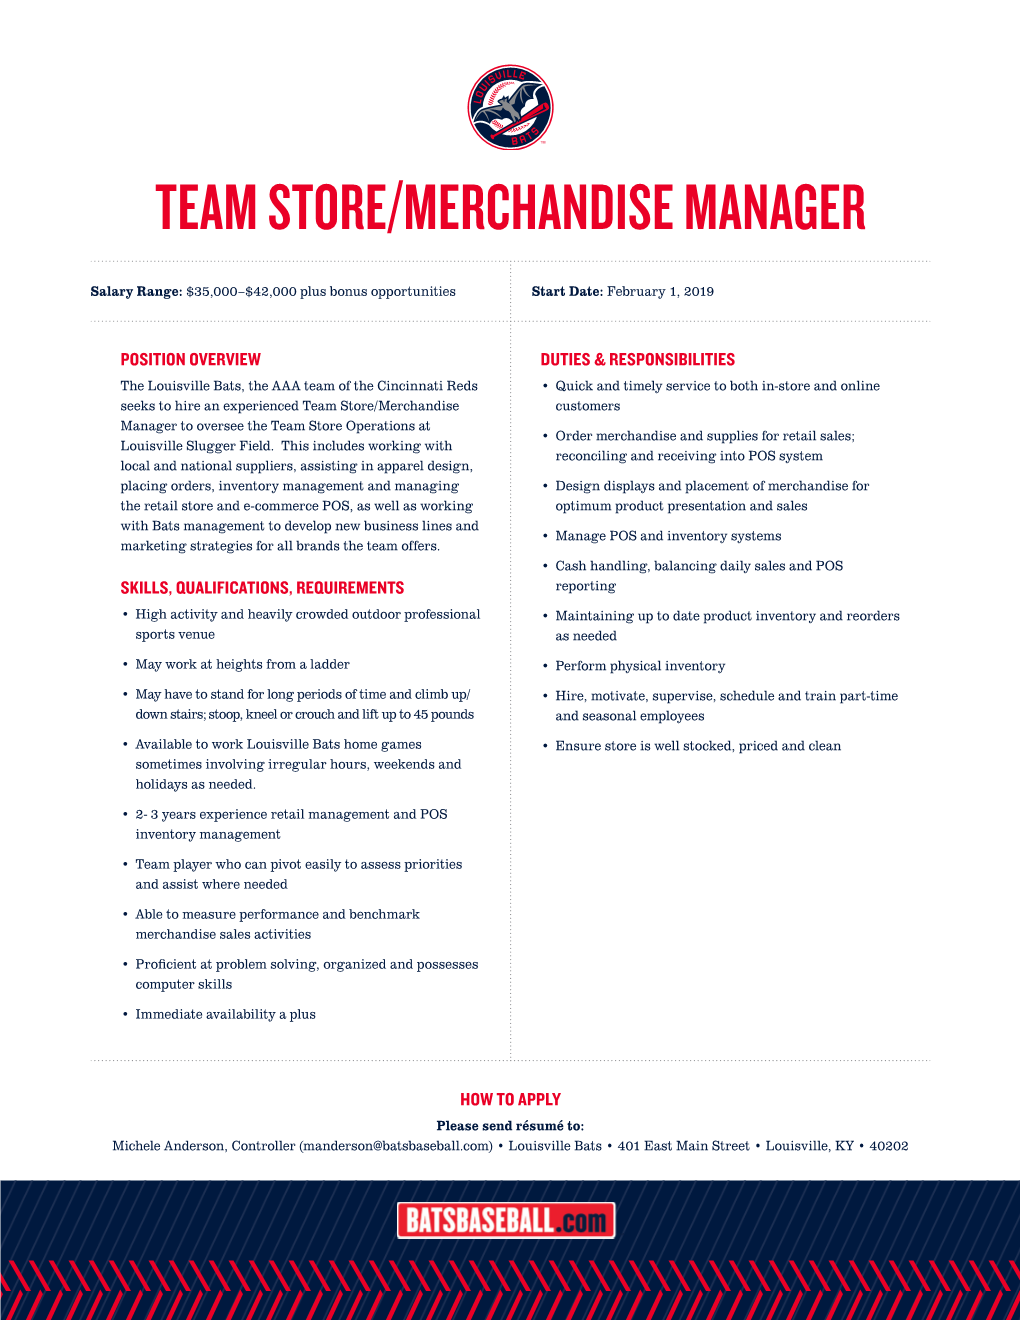 Team Store/Merchandise Manager